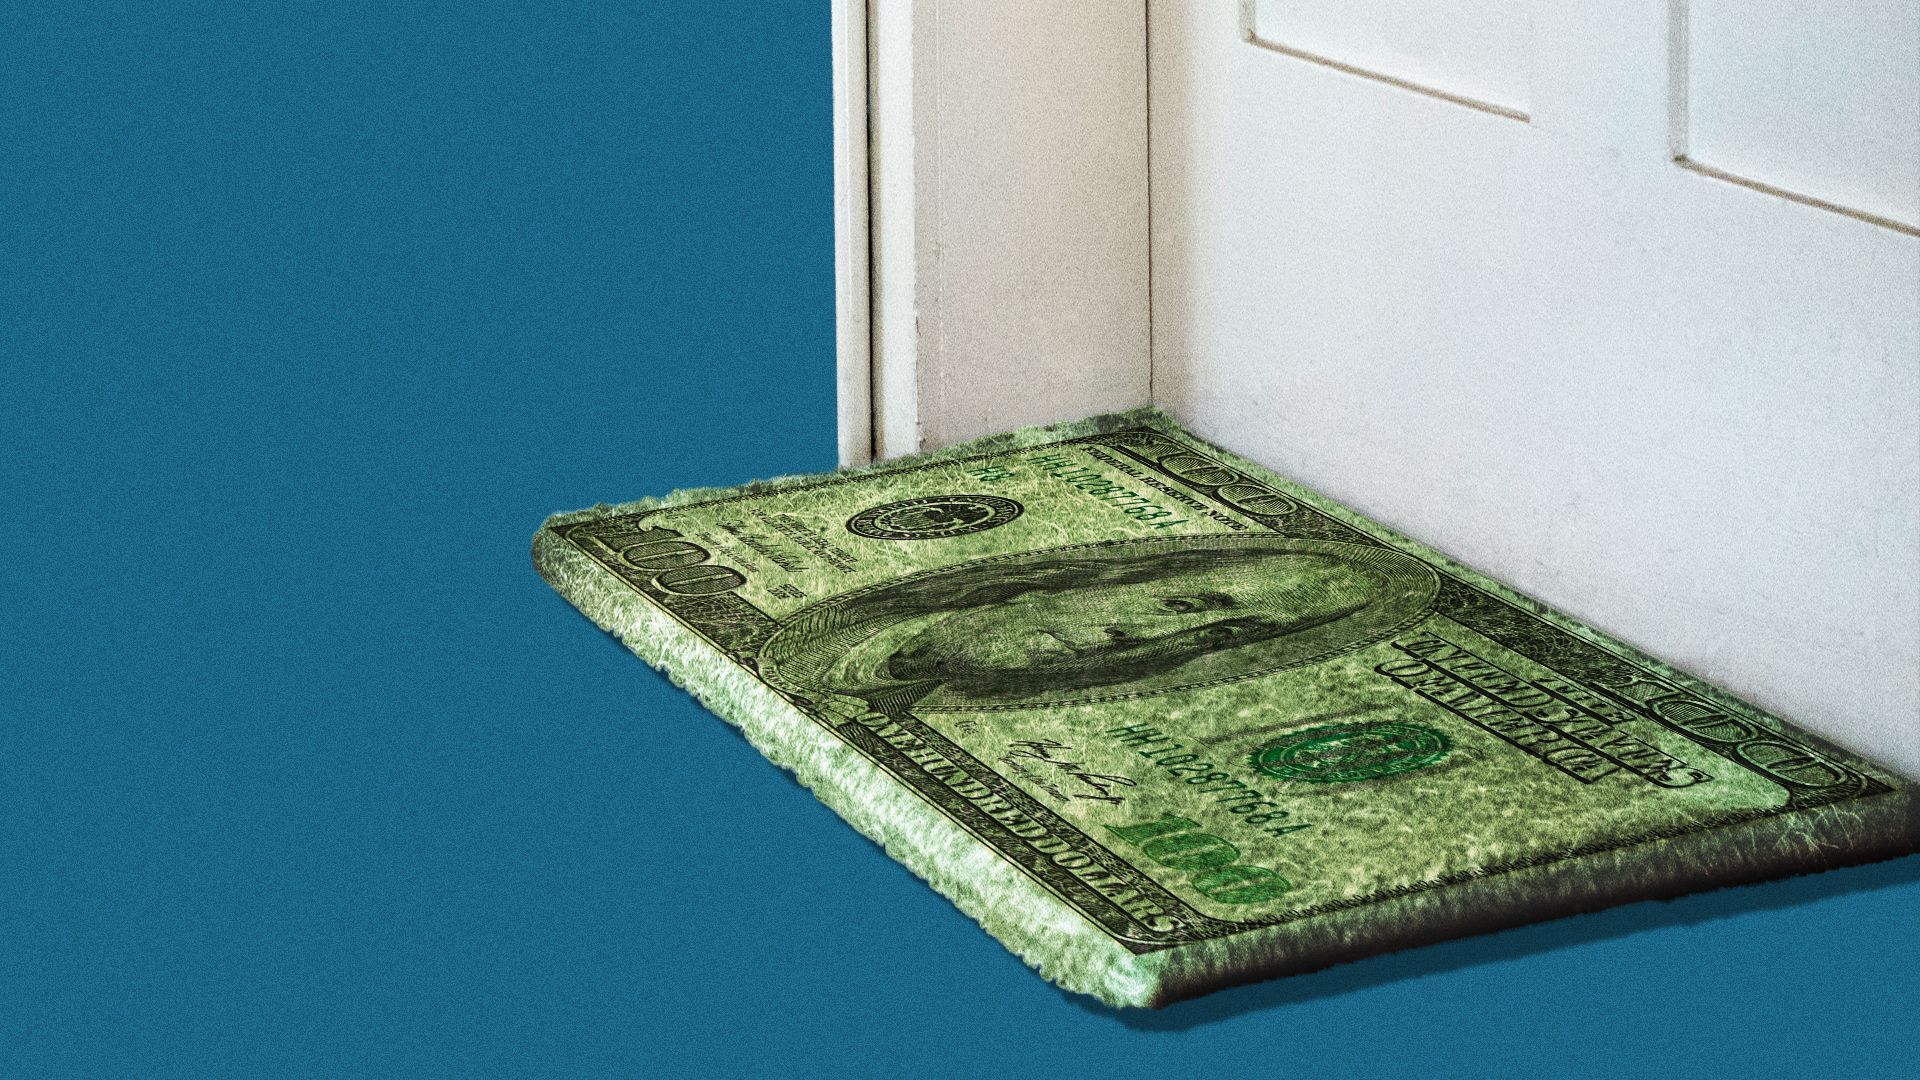 Illustration of a welcome mat that is a one-hundred dollar bill.